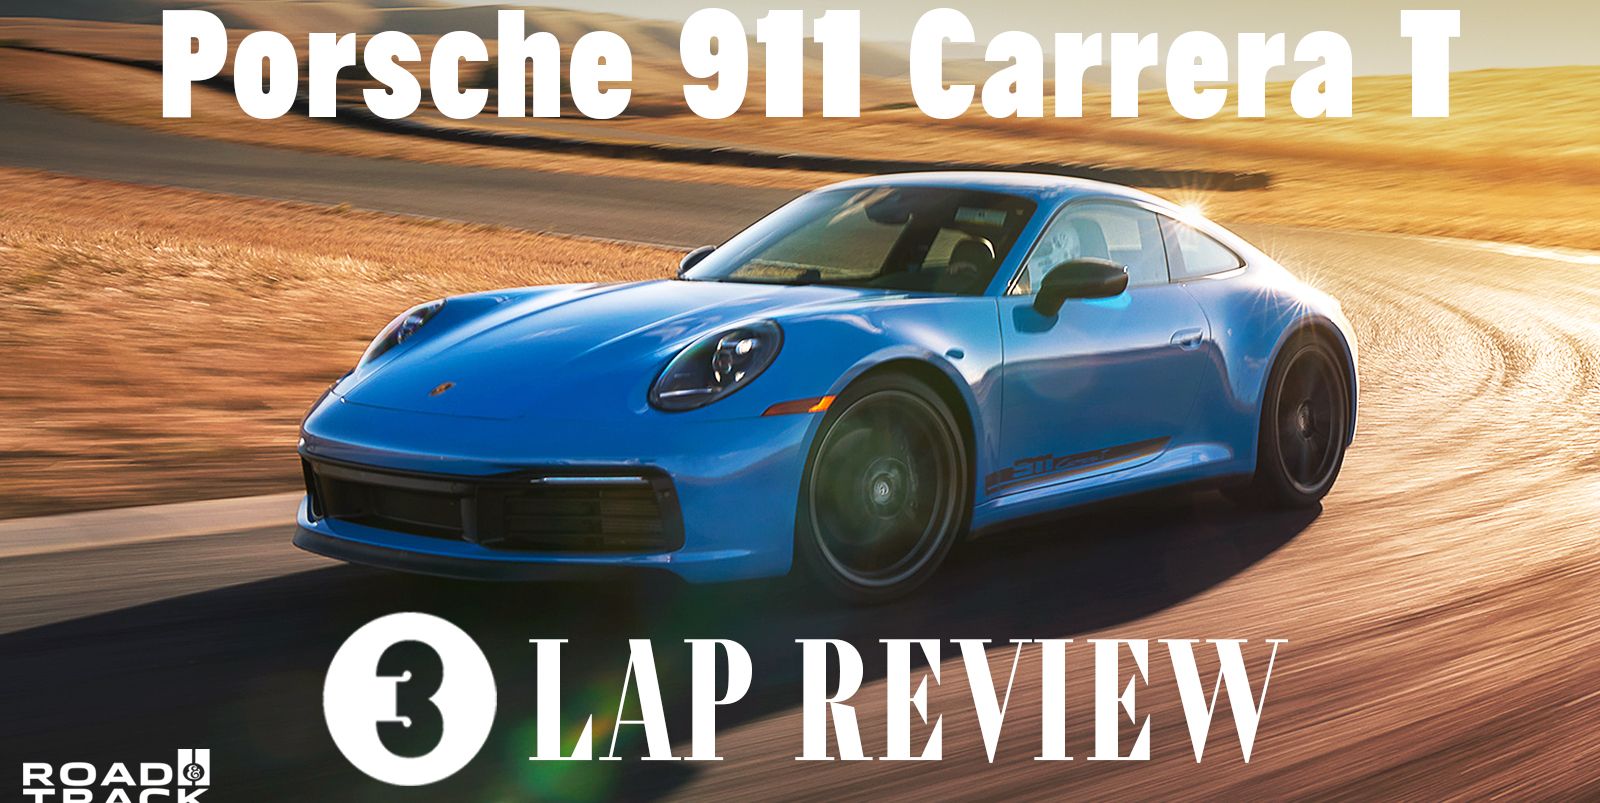 Is this Porsche 911 Carrera T Really Worth $128,000?